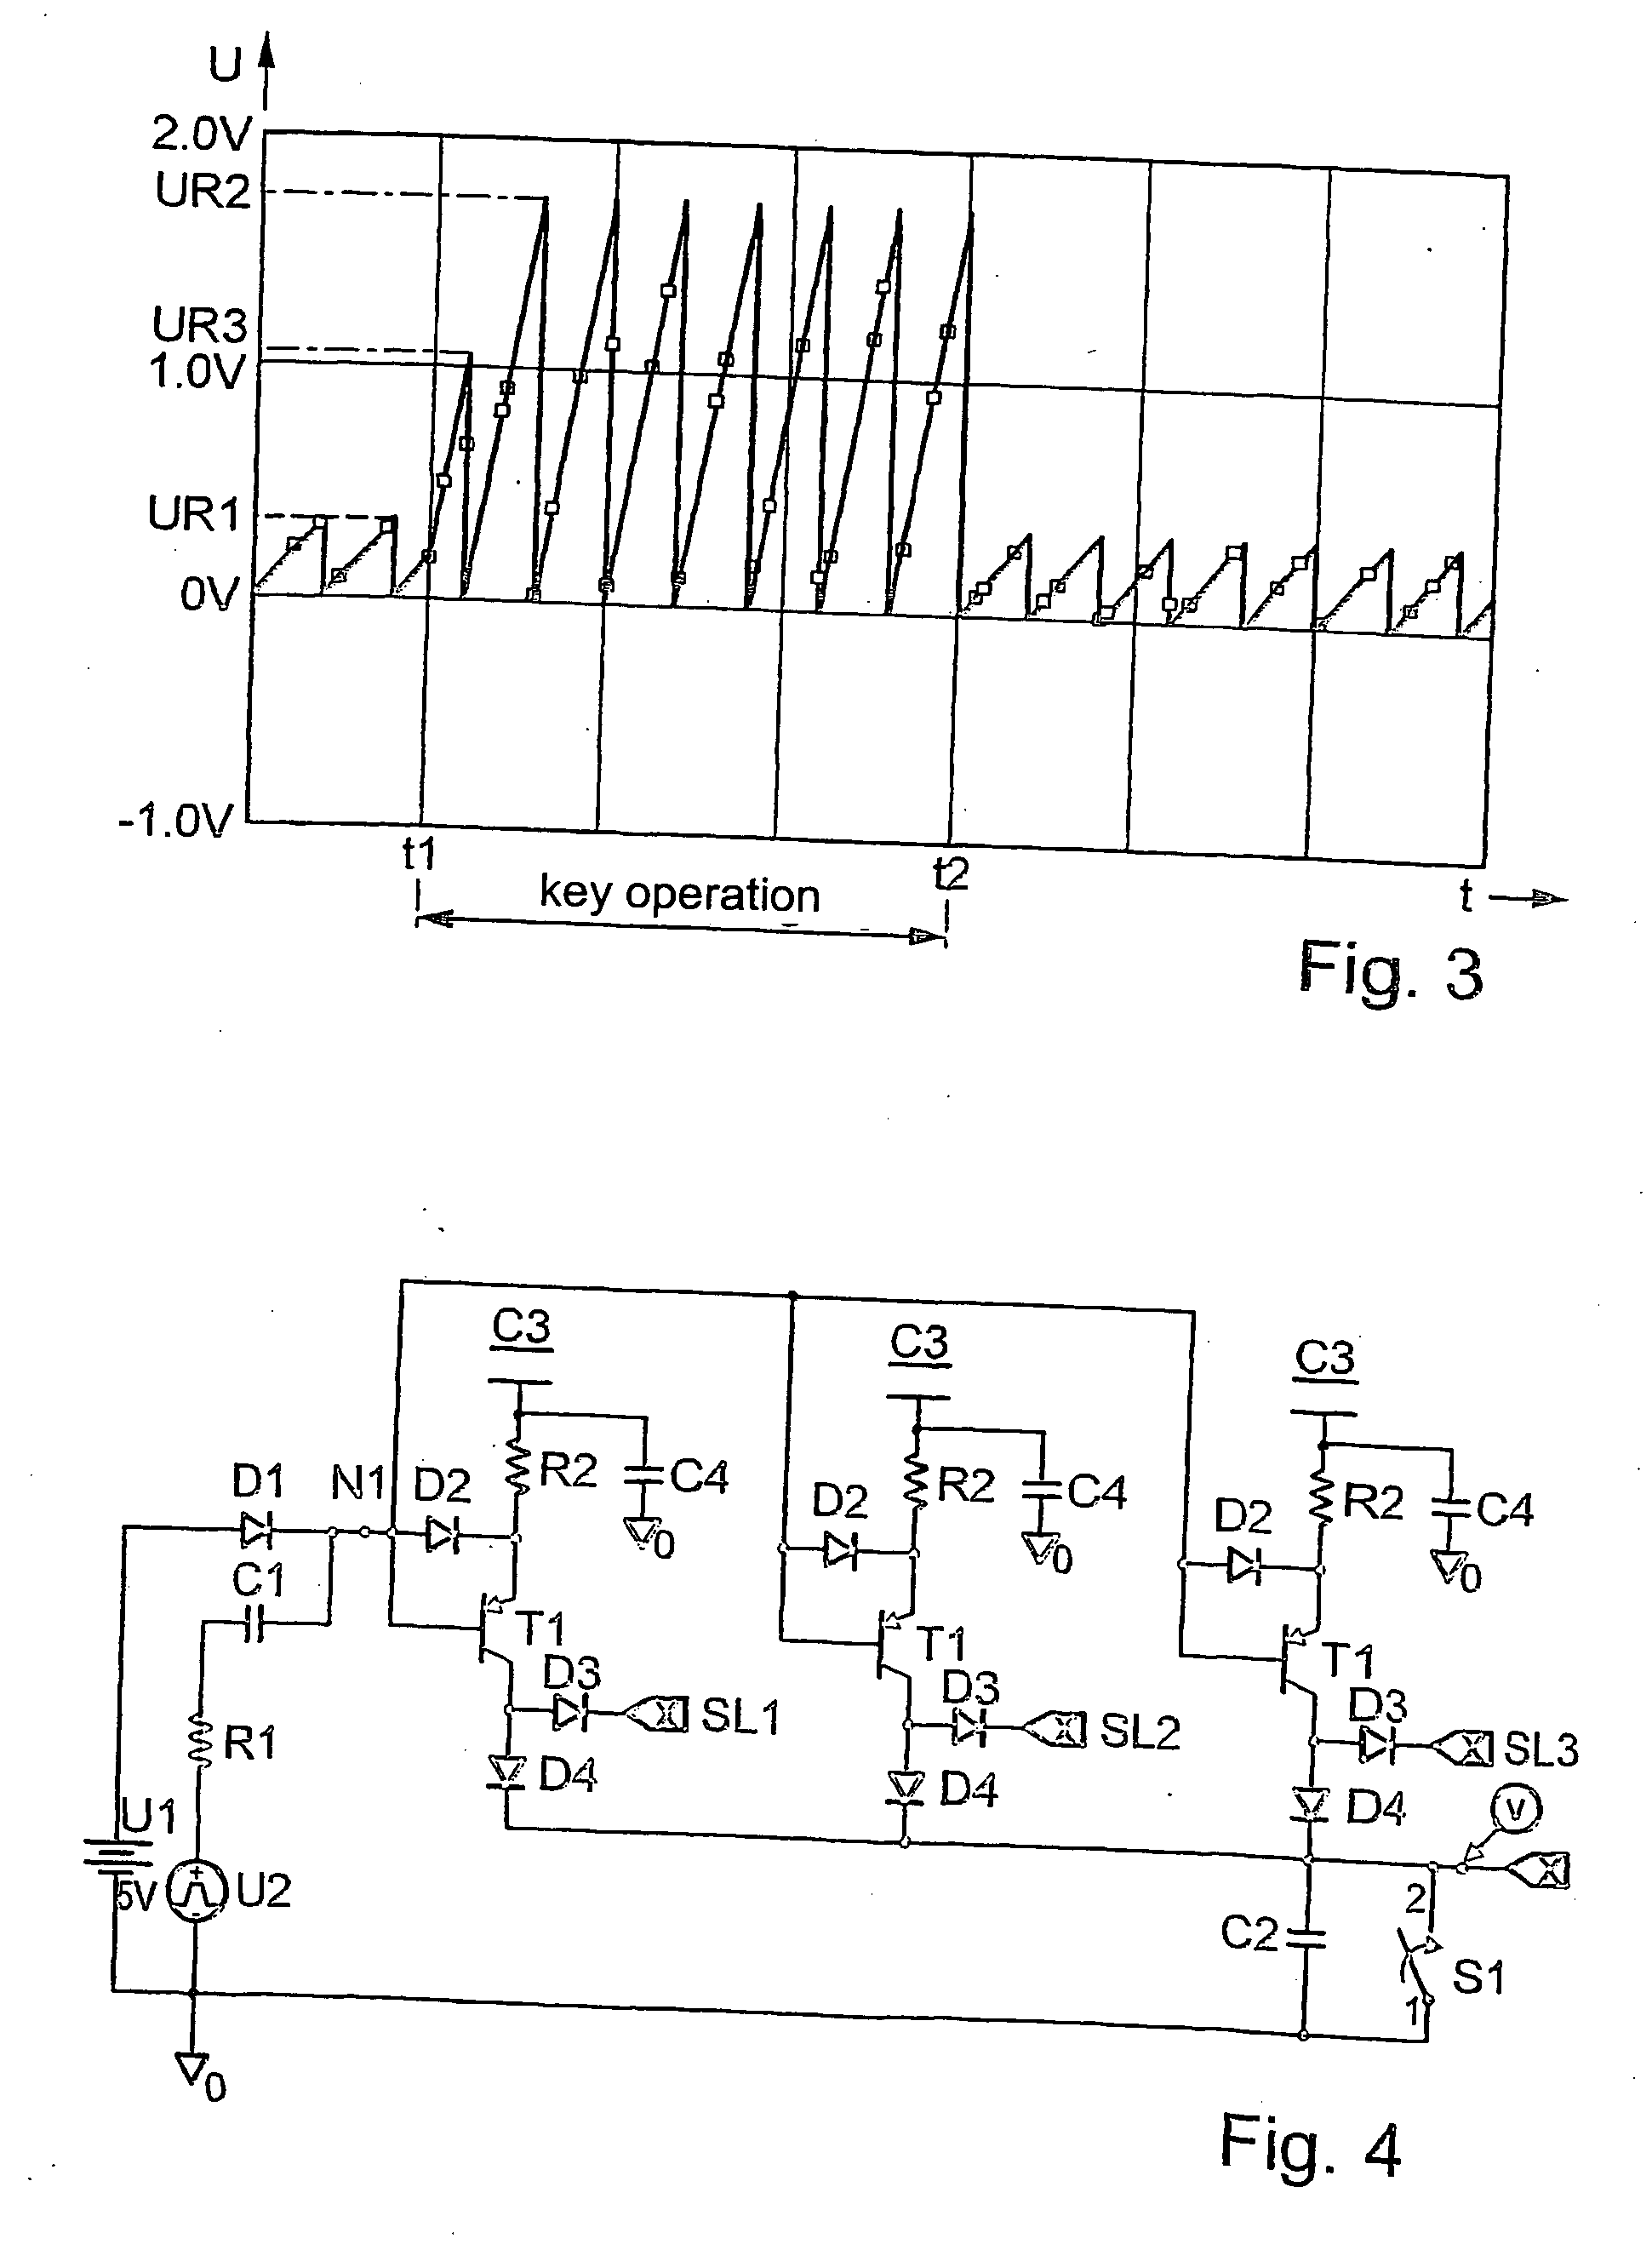 Circuit arrangement for a capacitive proximity switch